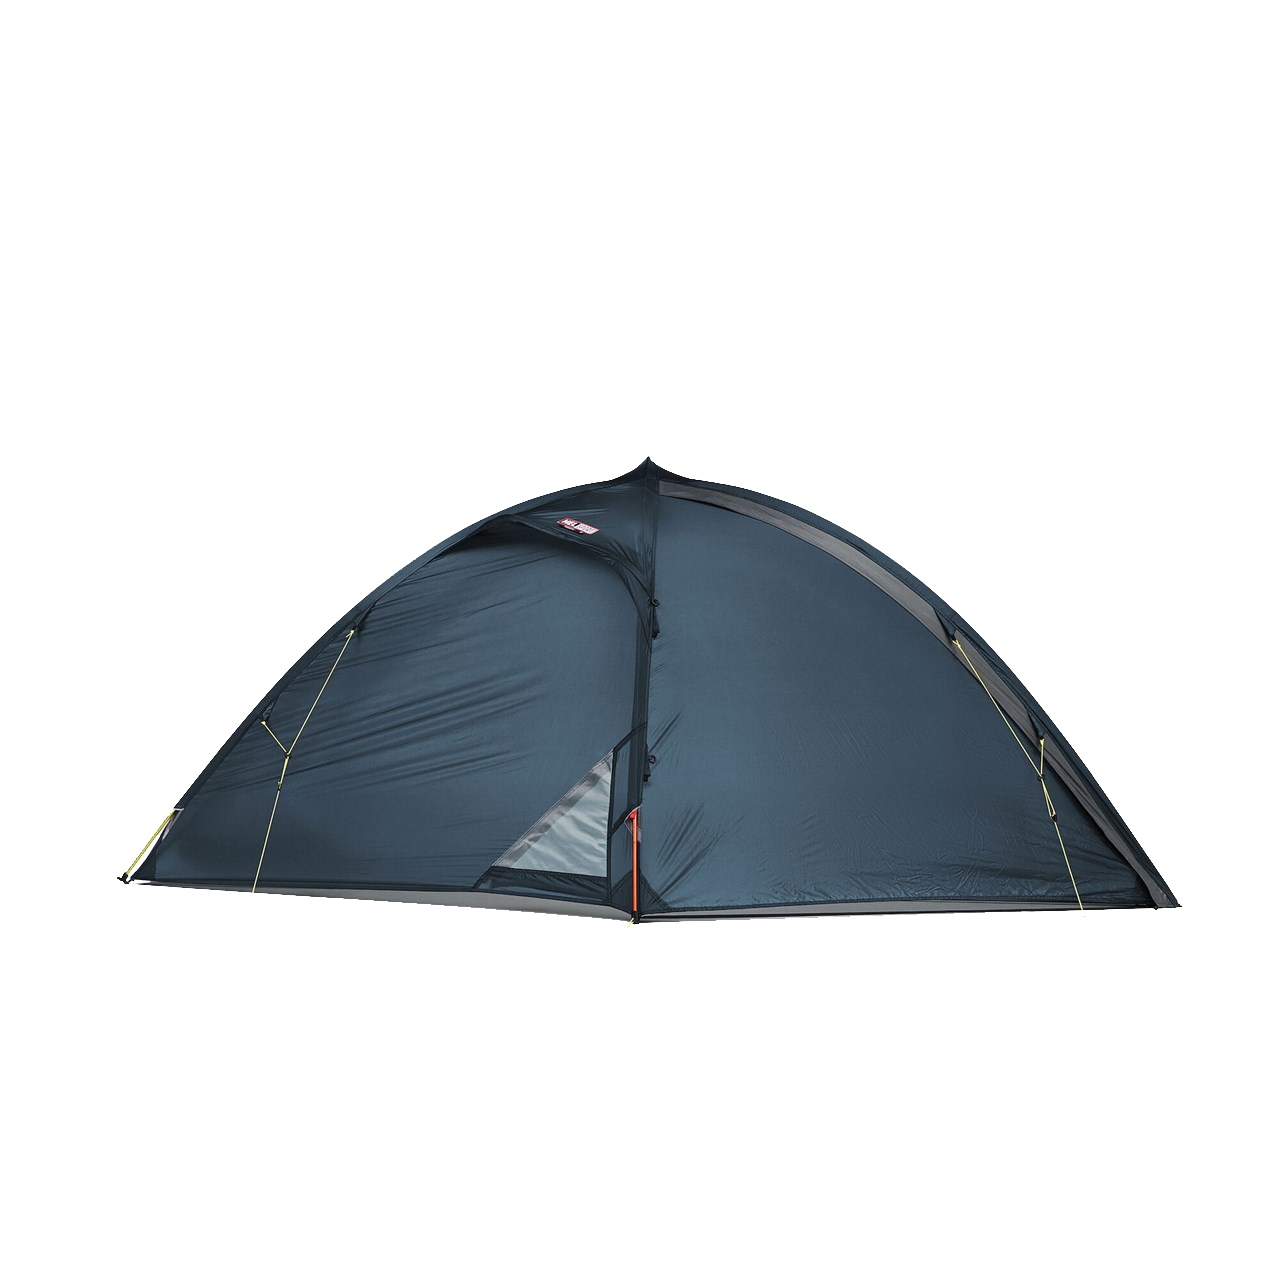 Picture of Helsport Reinsfjell Superlight 2 Tent - blue